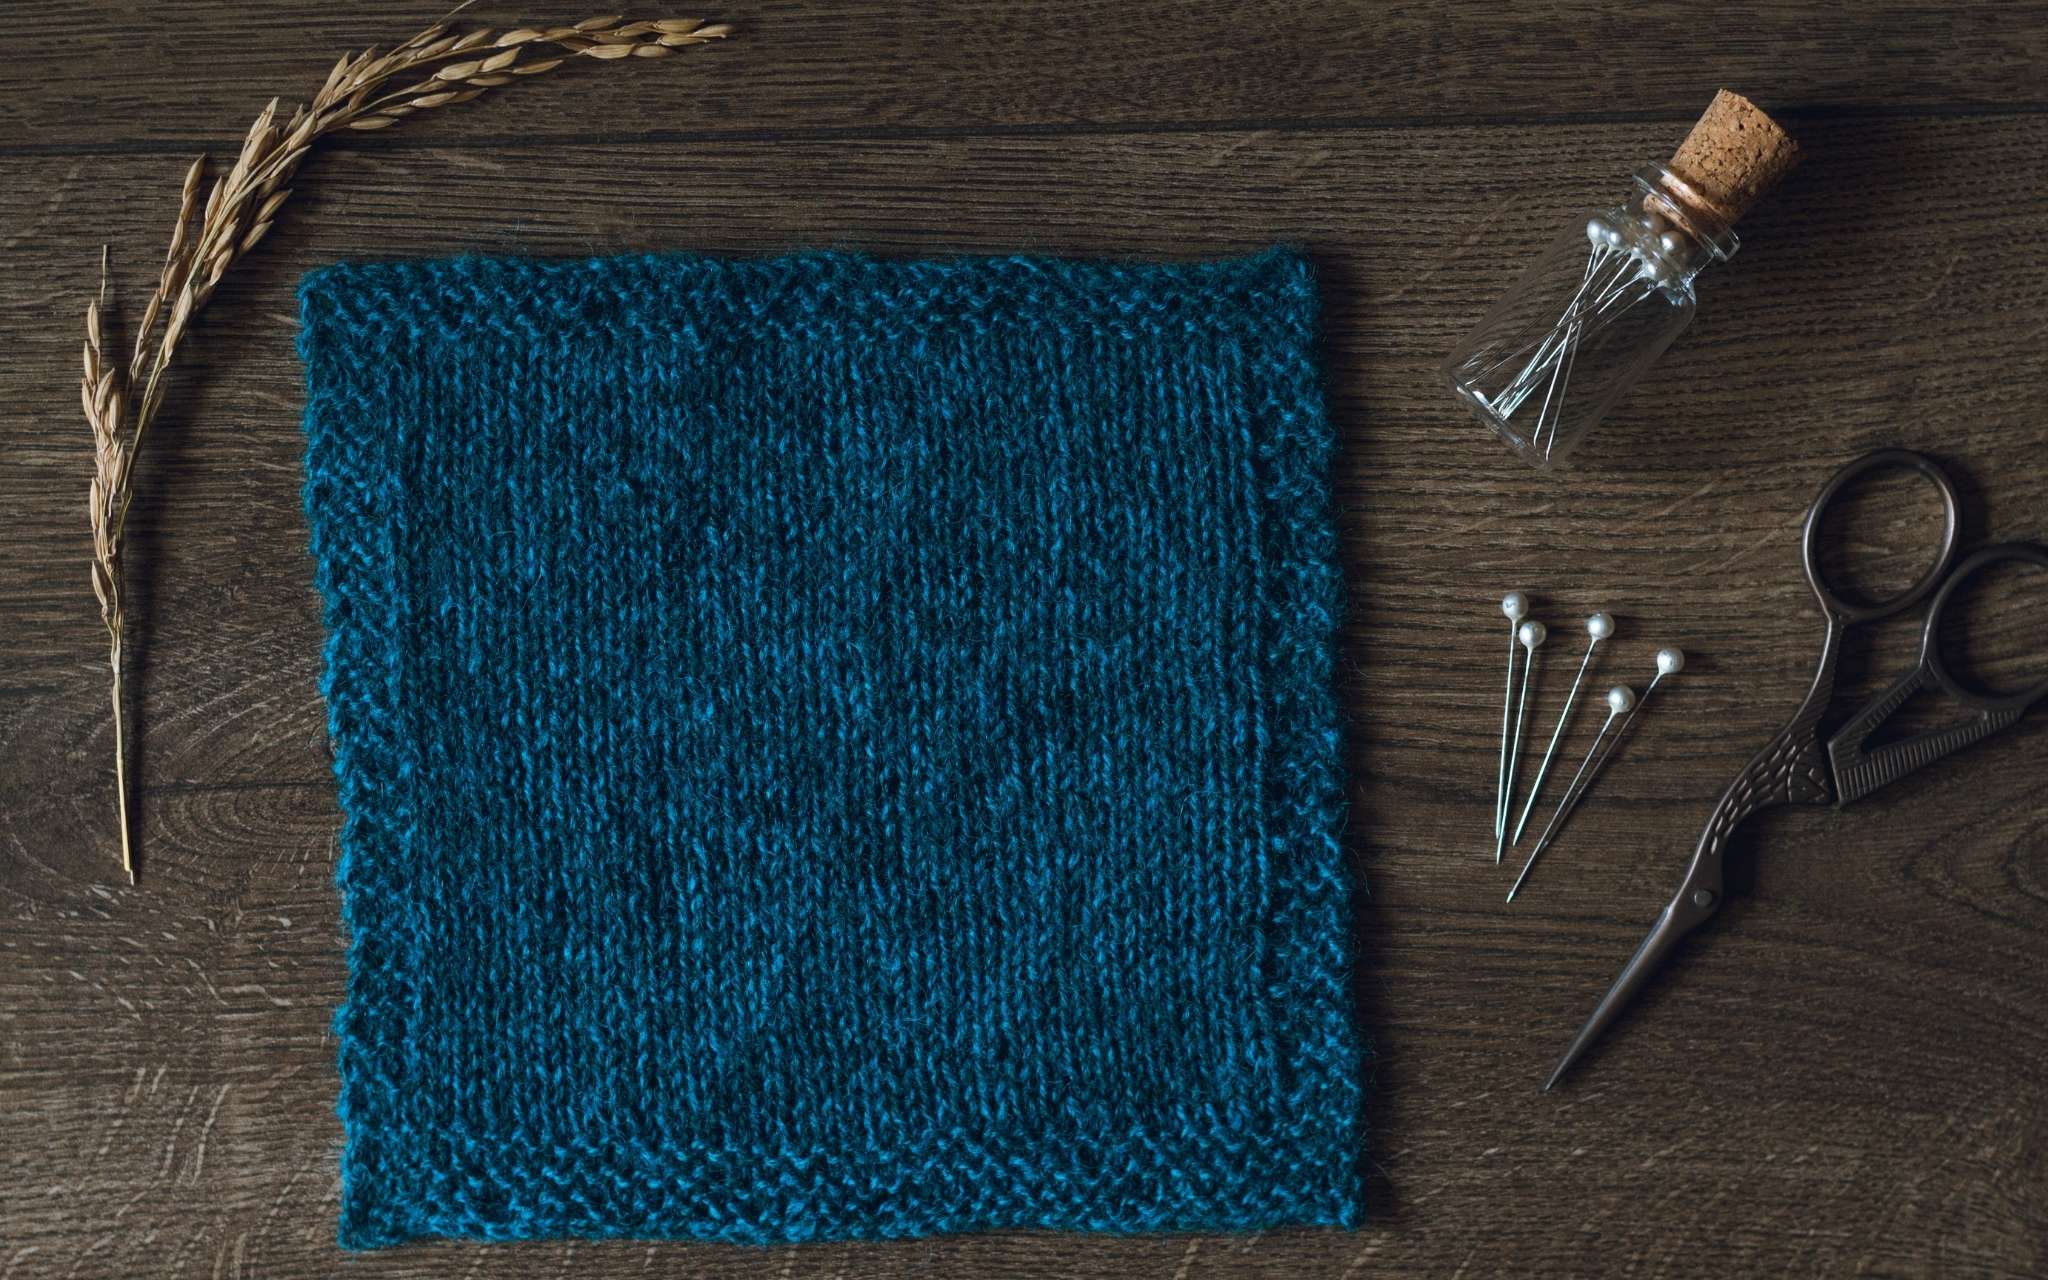 A swatch of stocking stitch in dark blue laid flat on a wooden surface. There are some dried stems, scissors and a bottle of pints to the side.